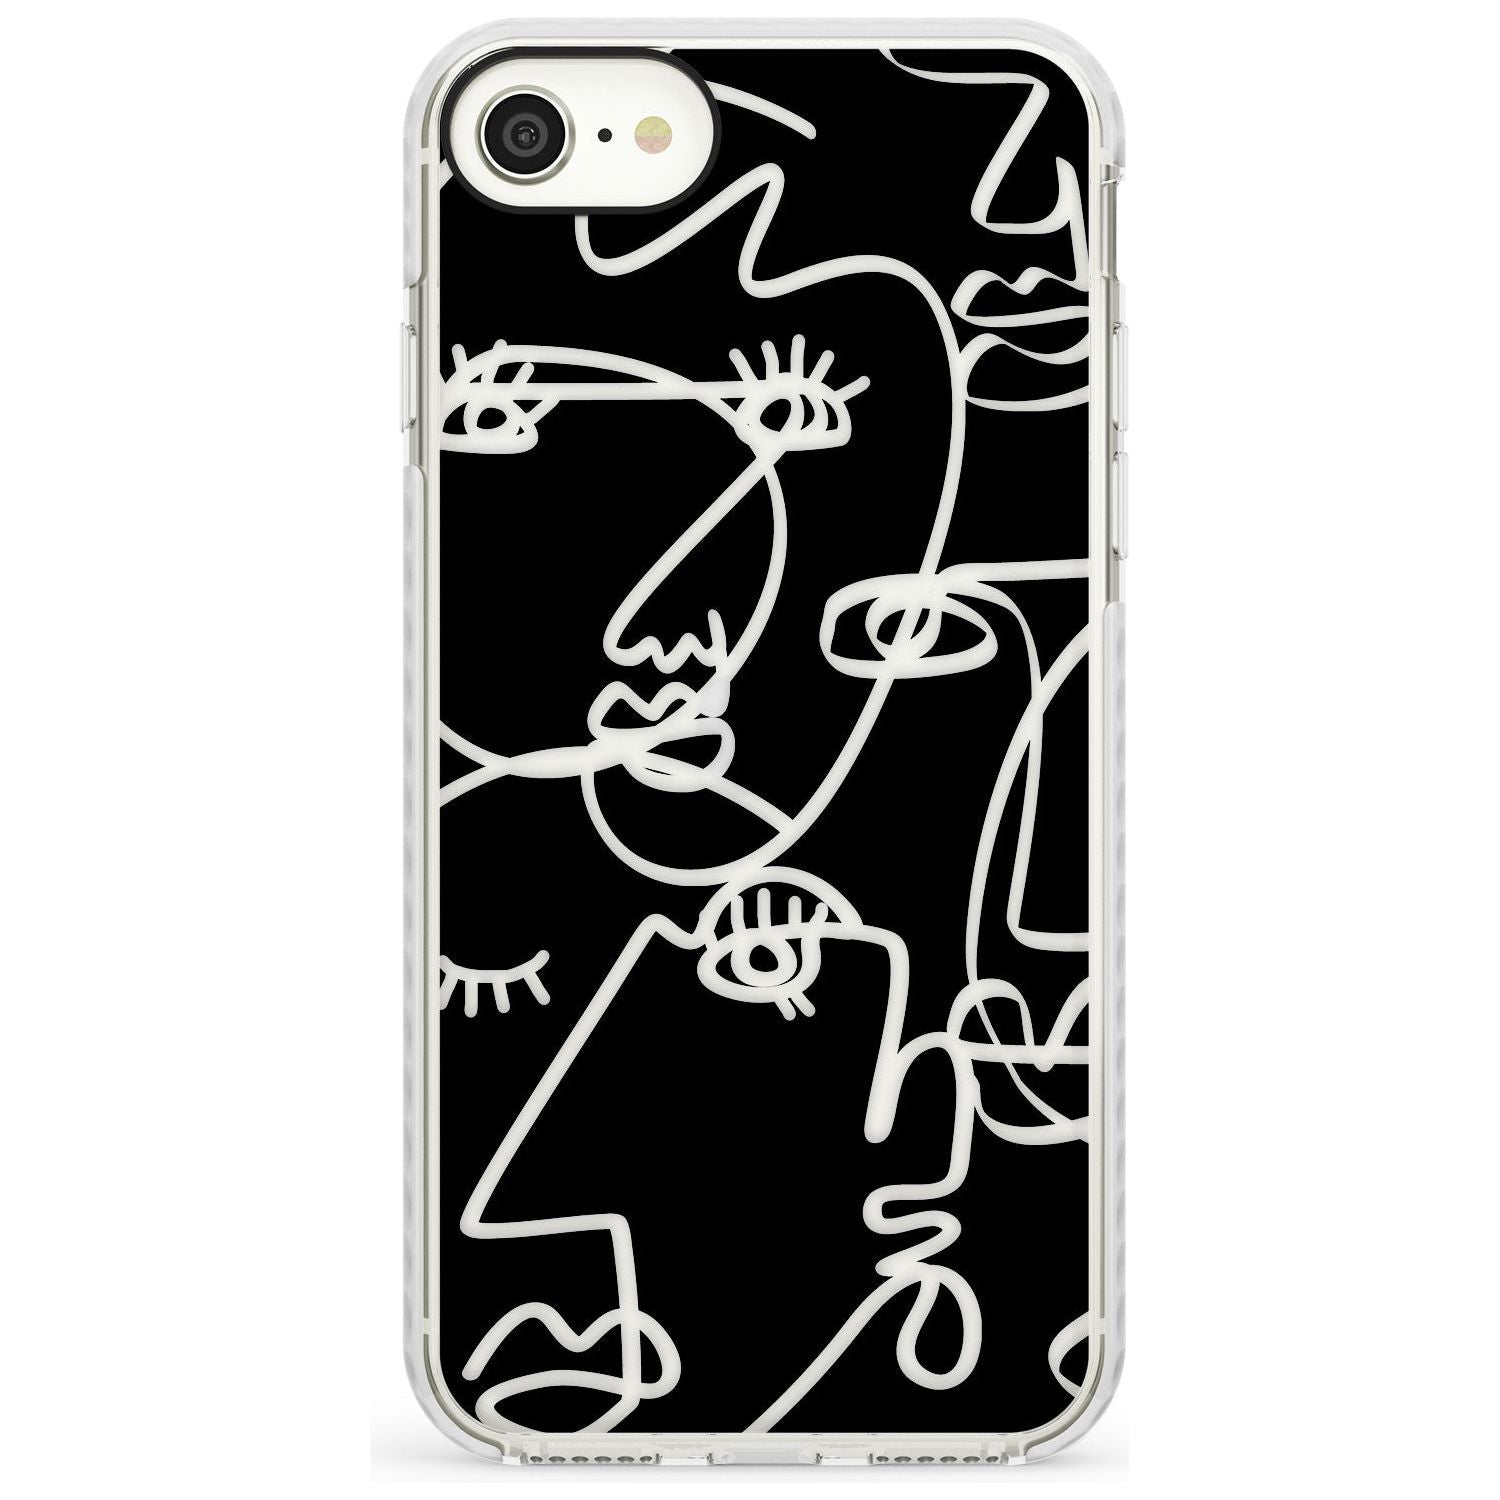 Continuous Line Faces: Clear on Black Slim TPU Phone Case for iPhone SE 8 7 Plus